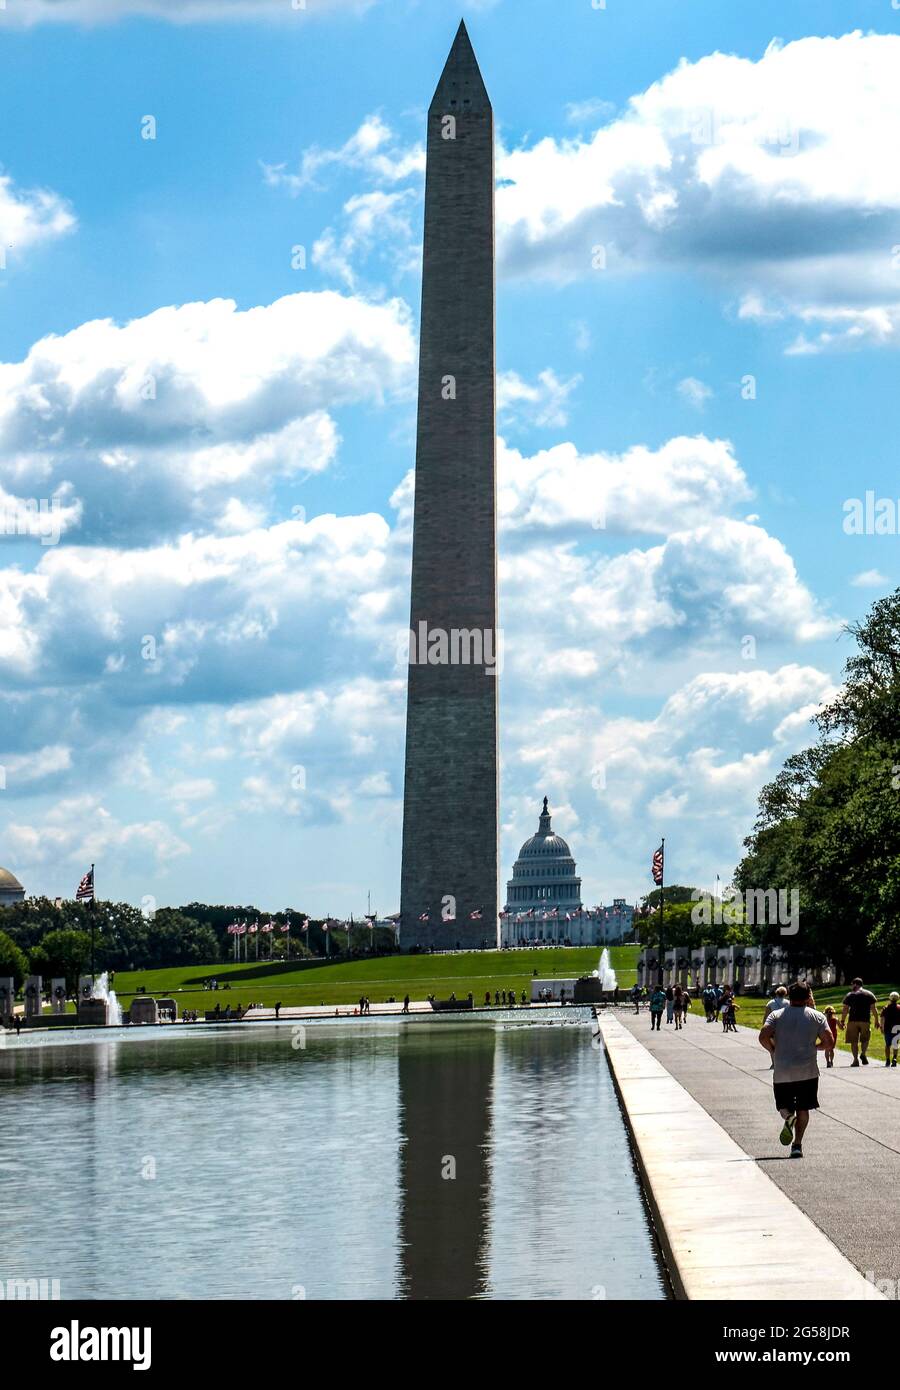 US Capital building and Washington Monument at the end of the Reflecting Pool, in Washington D.C. Stock Photo